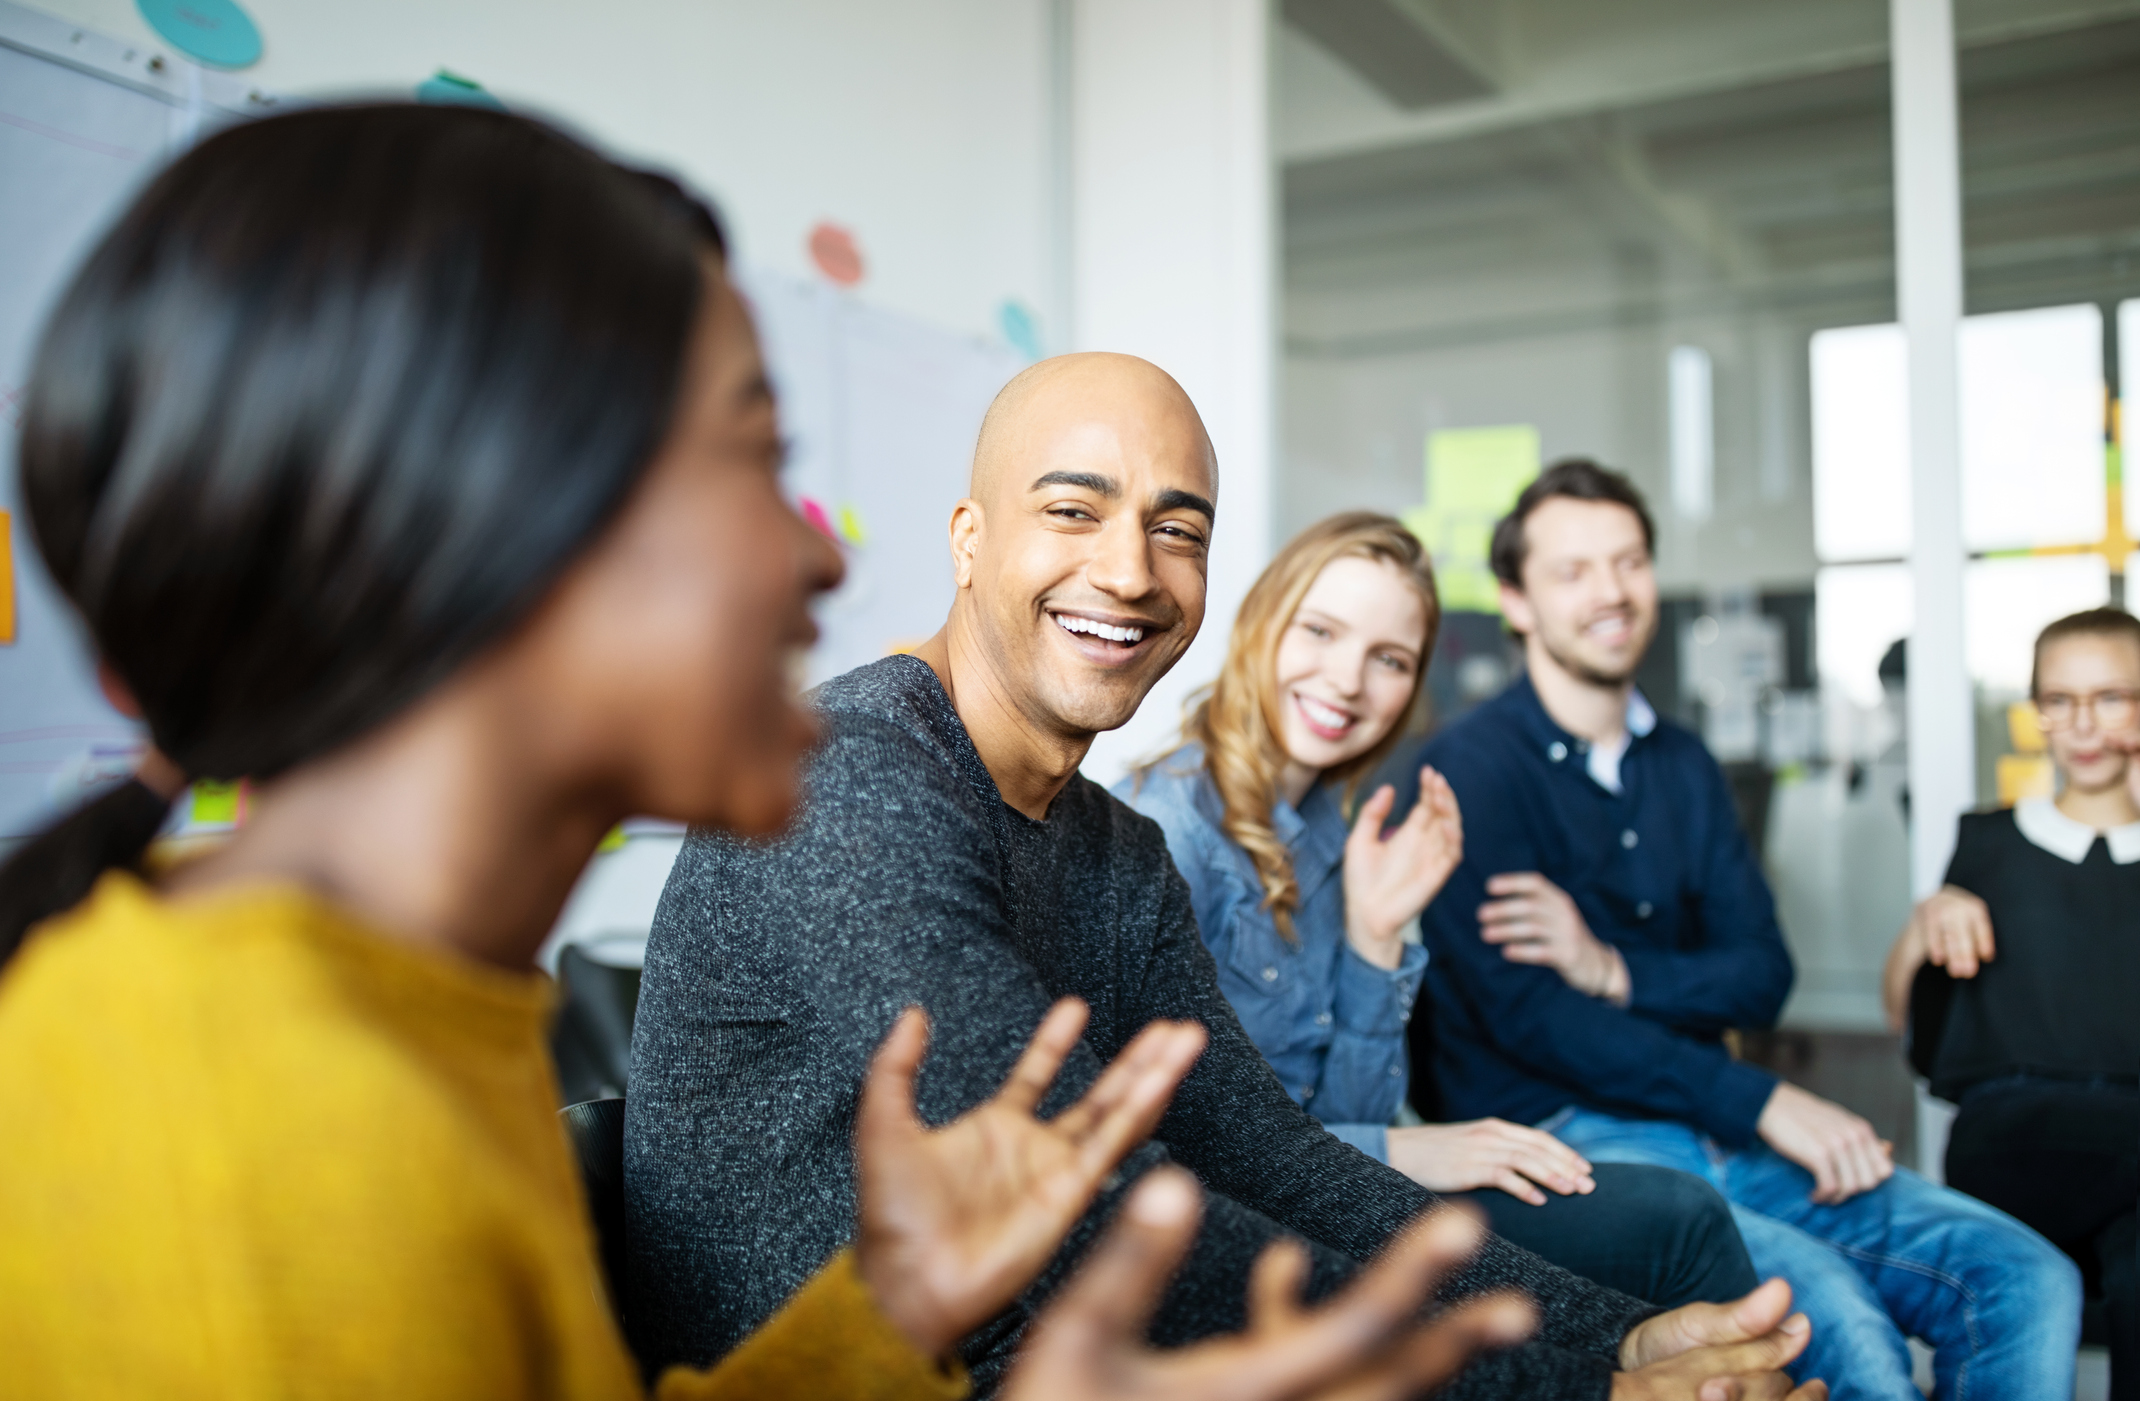 Empowering Managers to Support Employee Wellbeing through Connection and Recognition